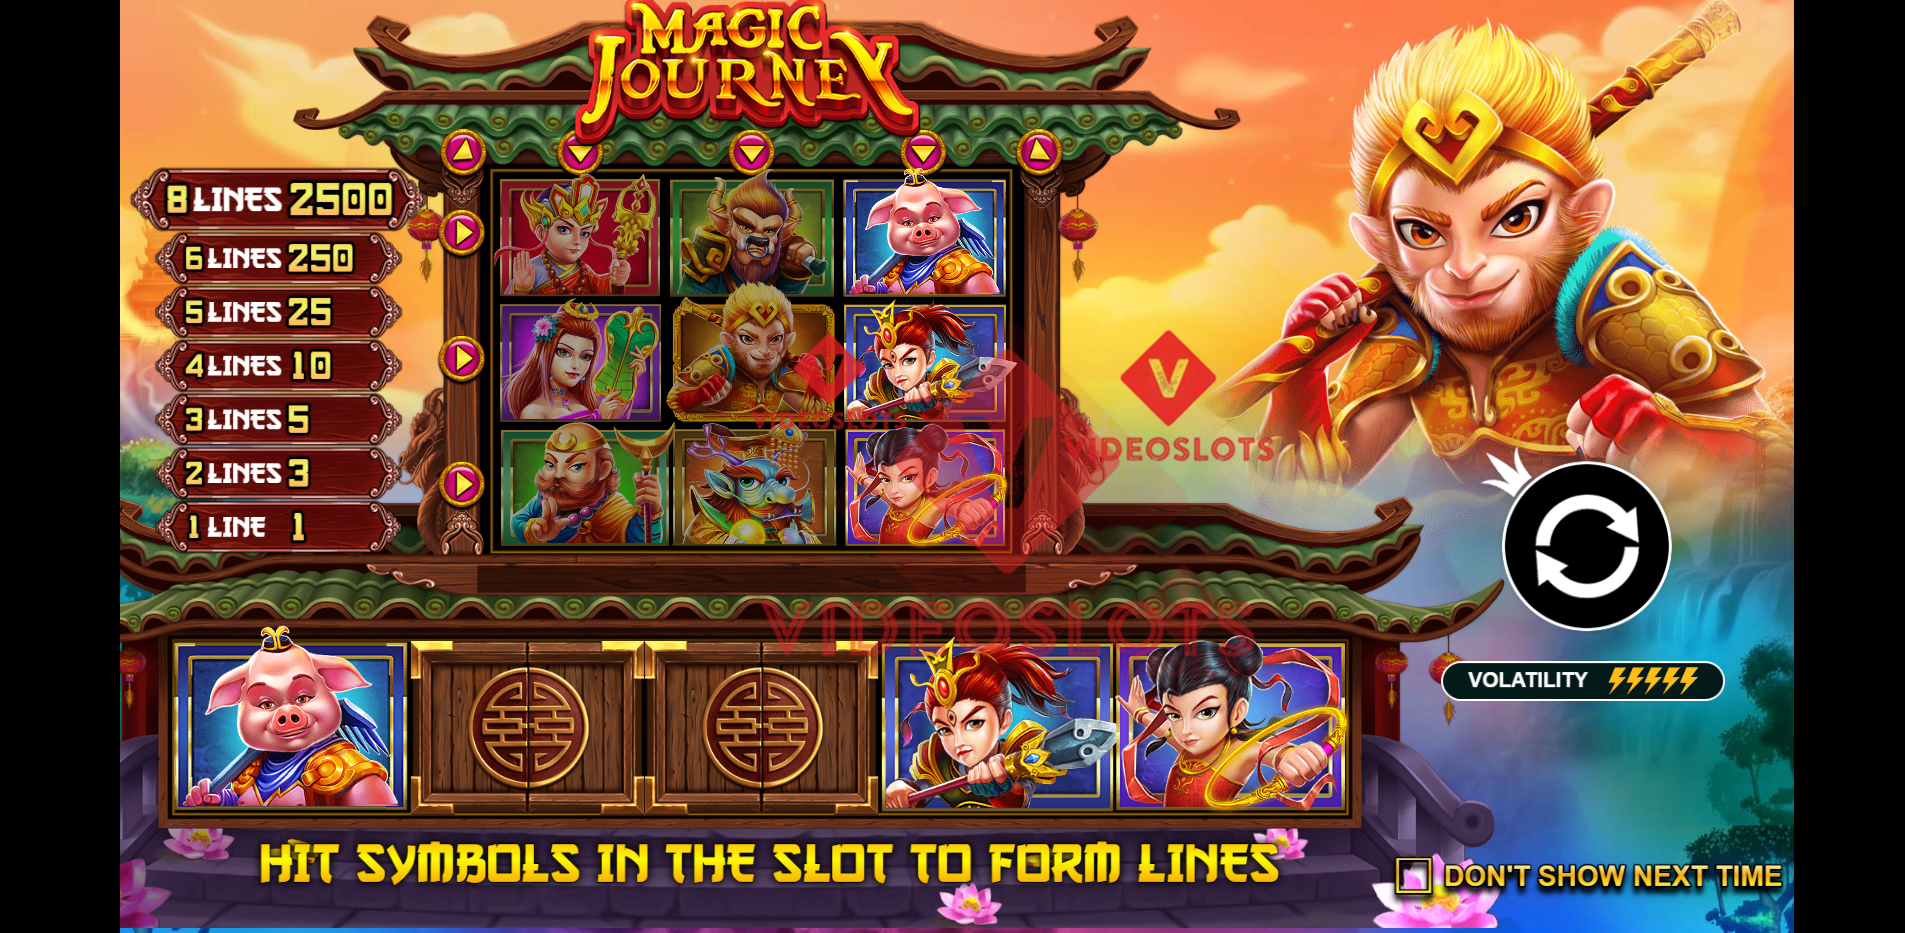 Game Intro for Magic Journey slot by Pragmatic Play